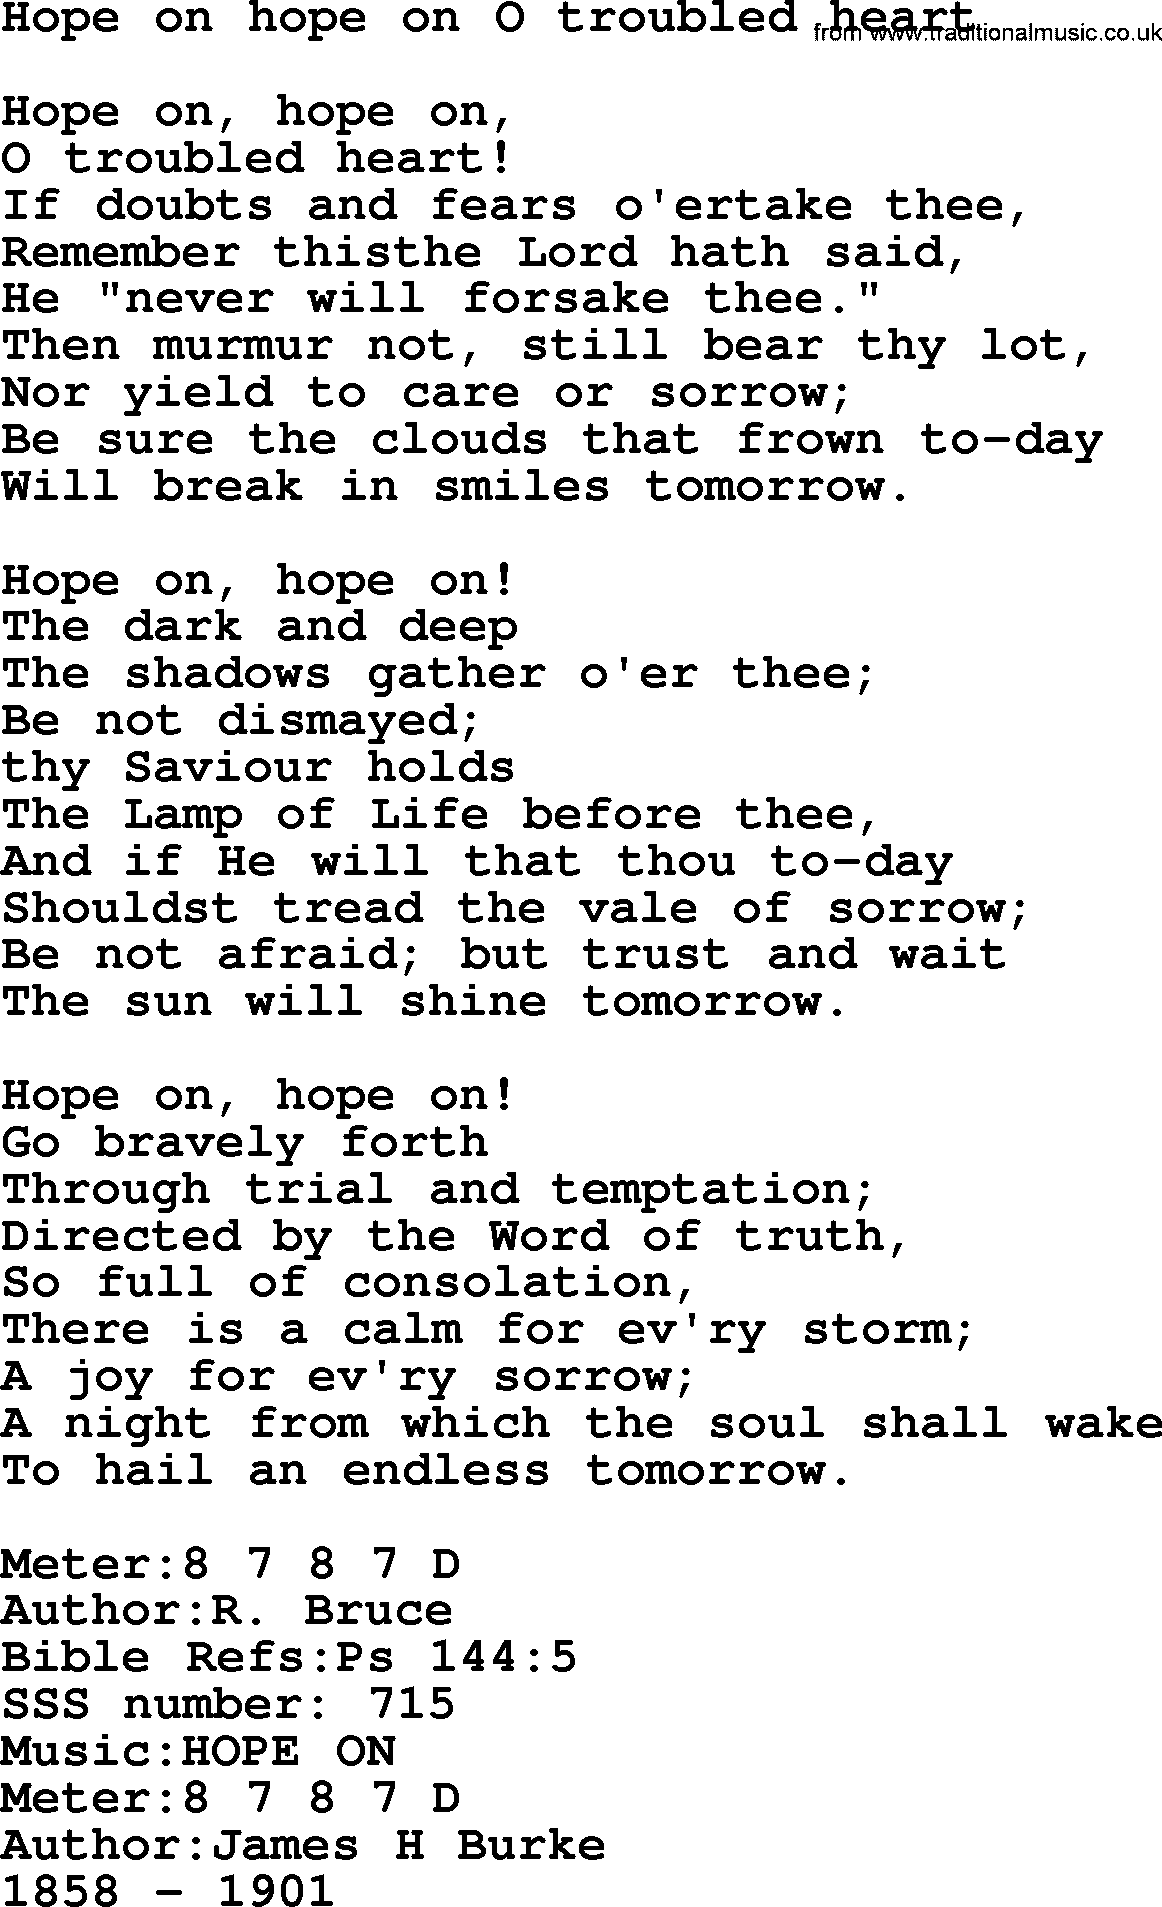 Sacred Songs and Solos complete, 1200 Hymns, title: Hope On Hope On O Troubled Heart, lyrics and PDF